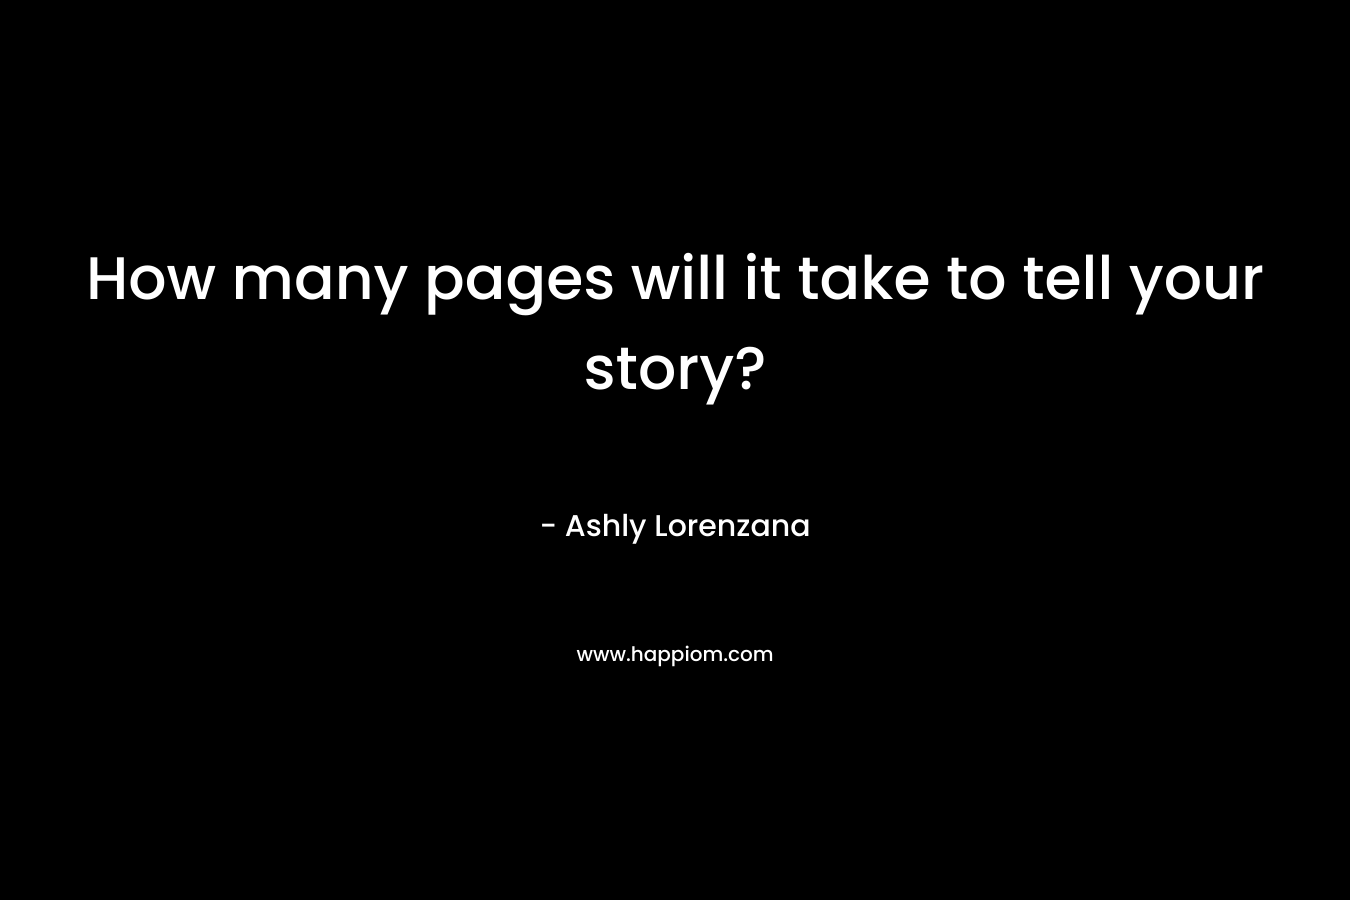 How many pages will it take to tell your story? – Ashly Lorenzana